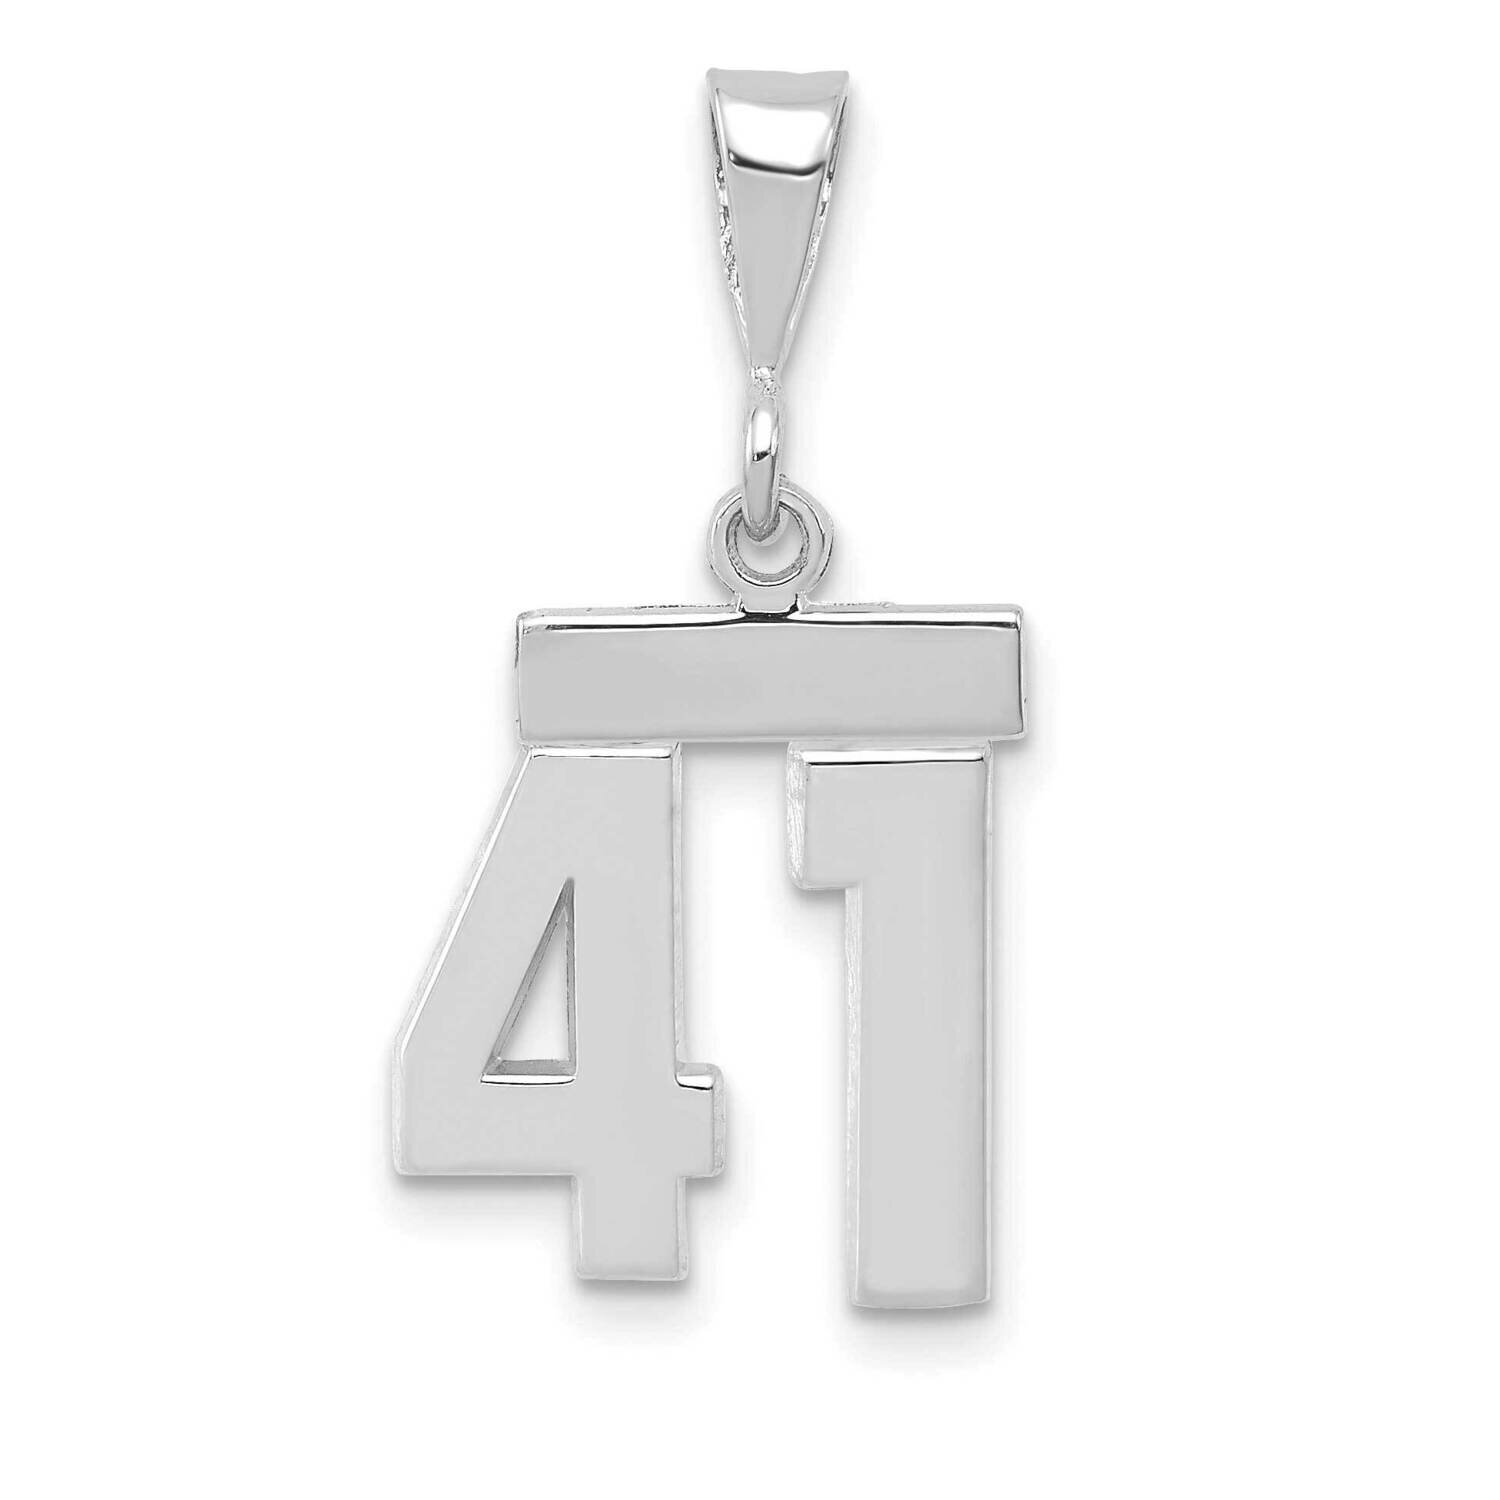 Number 41 Charm 14k White Gold Polished Small WSP41